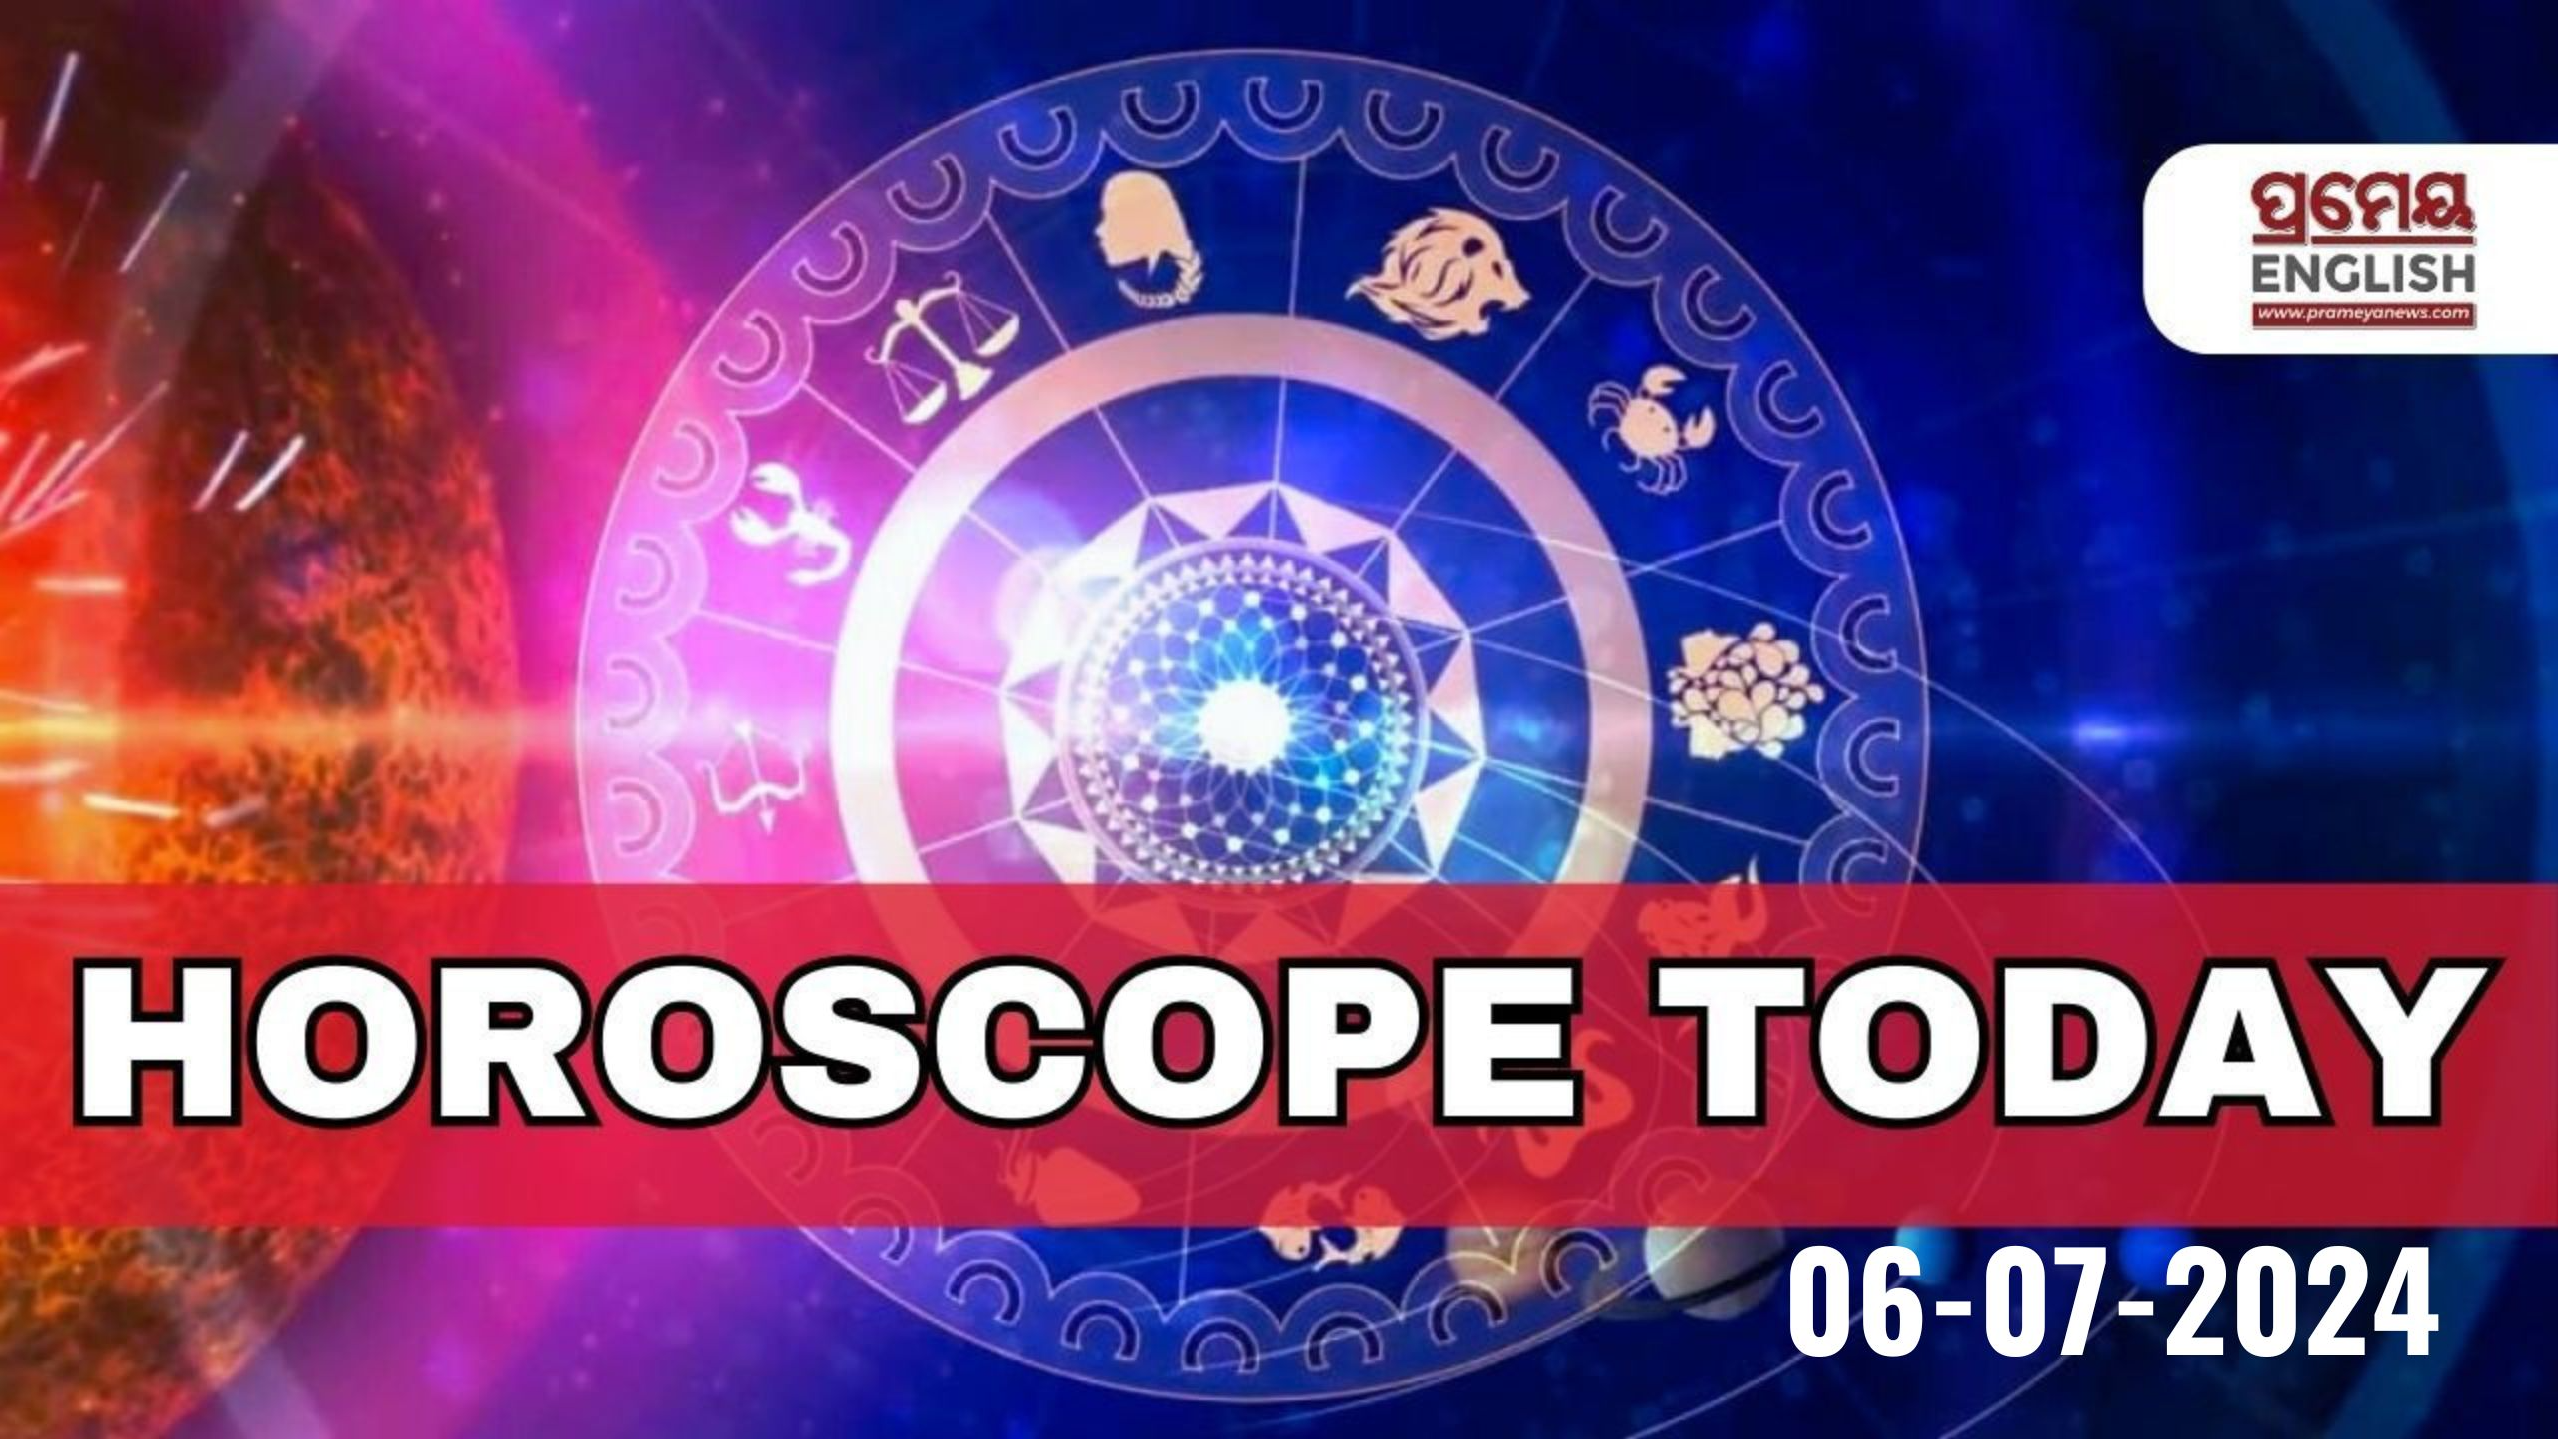 Horoscope Today: Astrological prediction for July 6, 2024